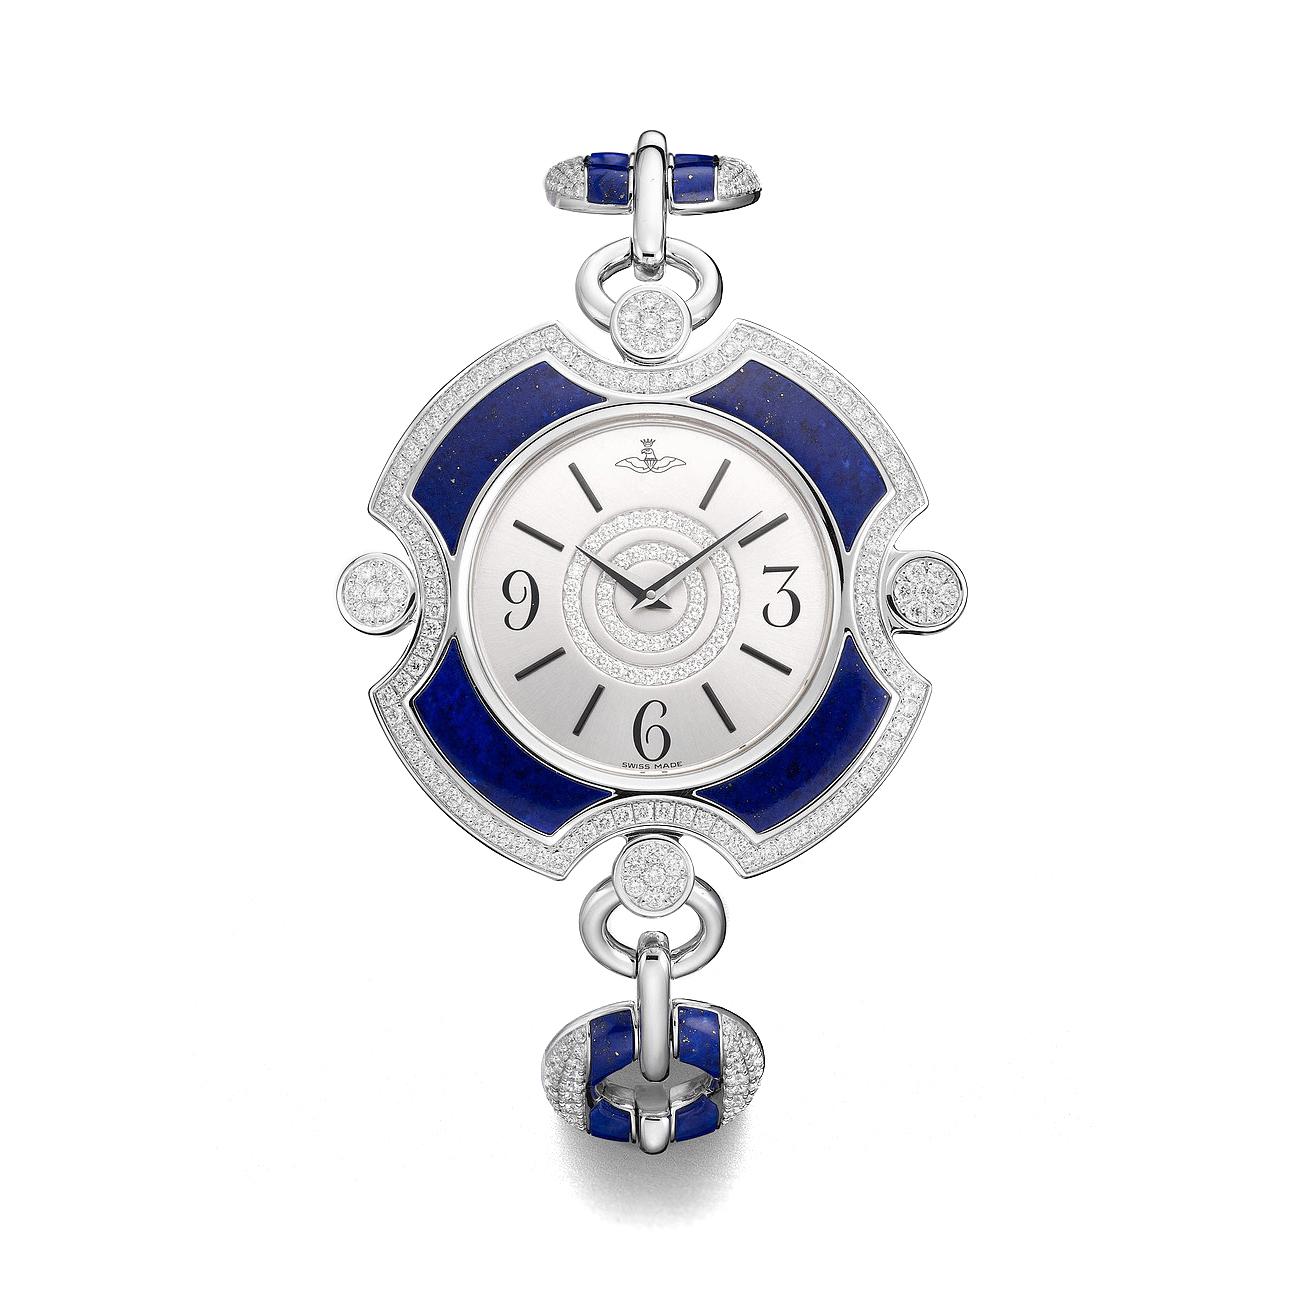 Watch in white gold 18kt set with 12 lapis luzuli  3.02 cts,case dial and bracelet set with 264 diamonds 3.02 cts quartz movement.             

We do not guarantee the functioning of this watch.